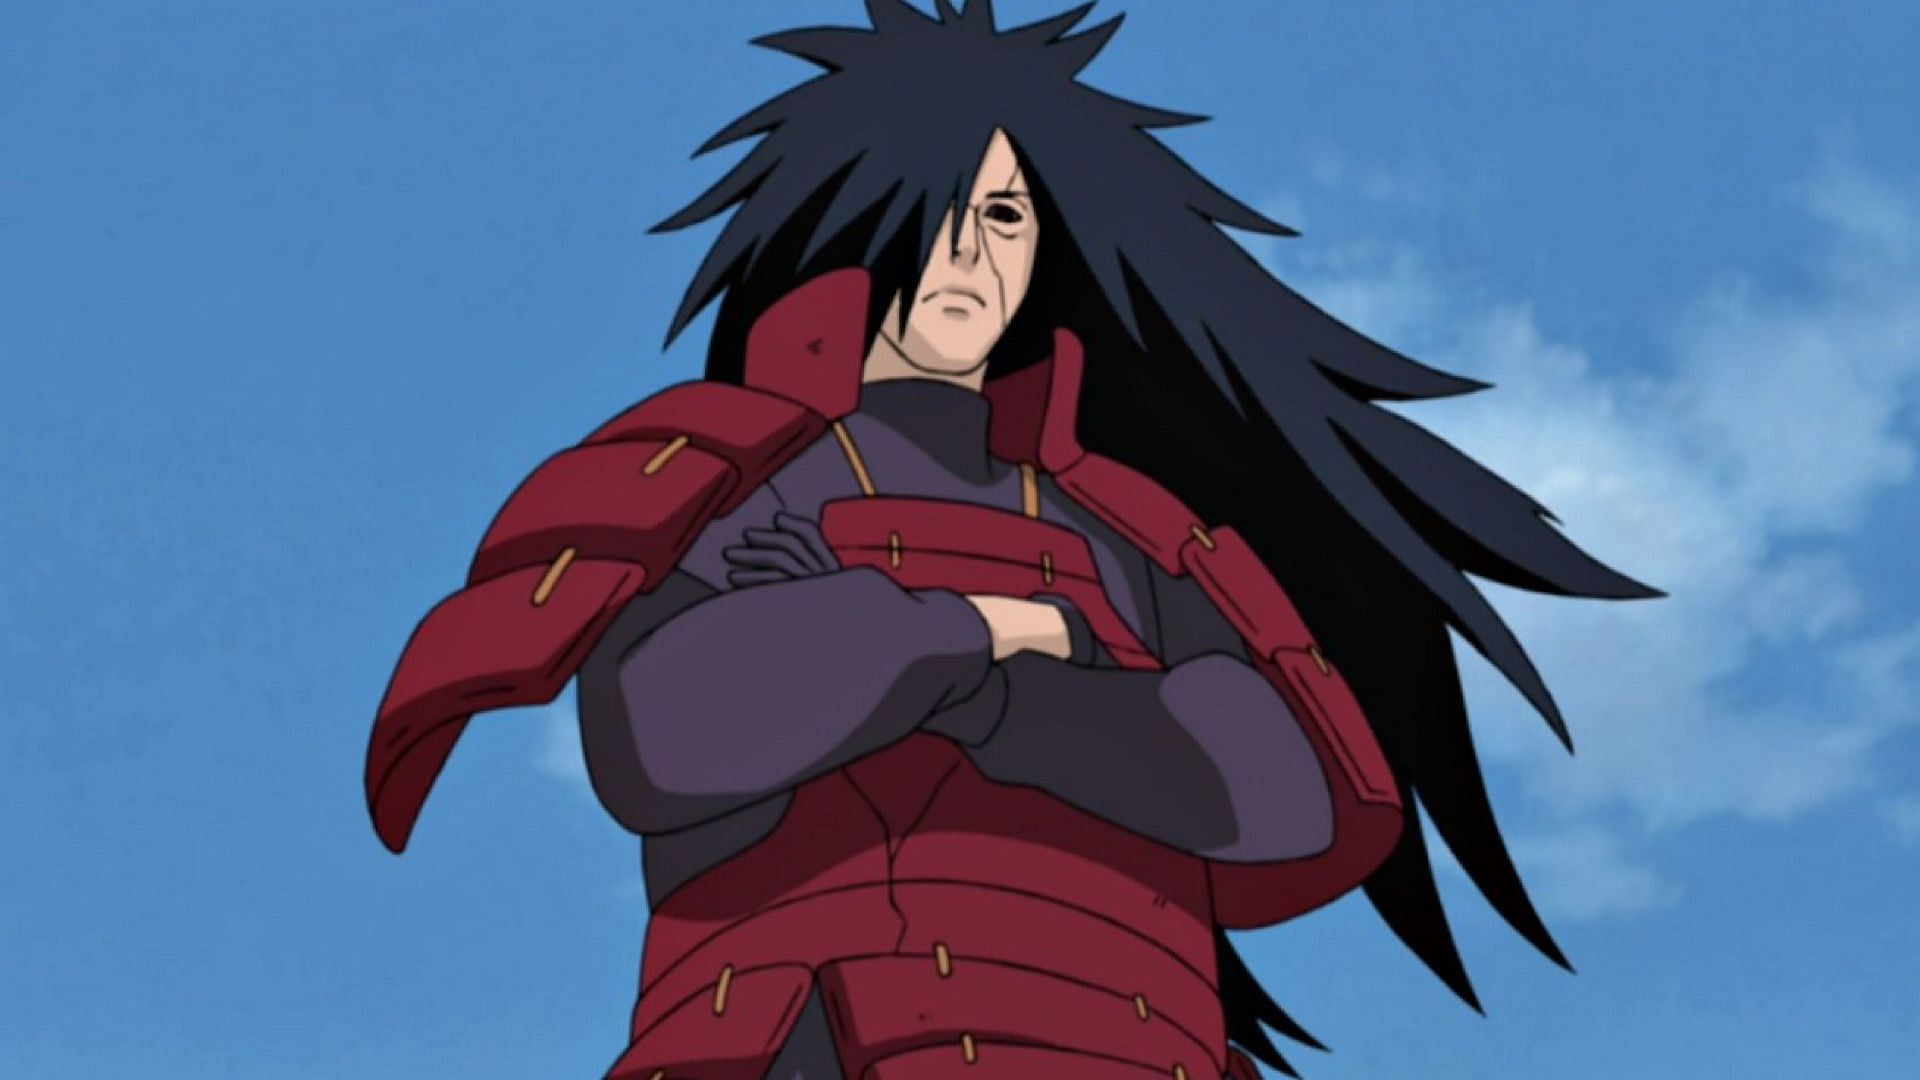 10 Anime Characters With Blood-Based Powers